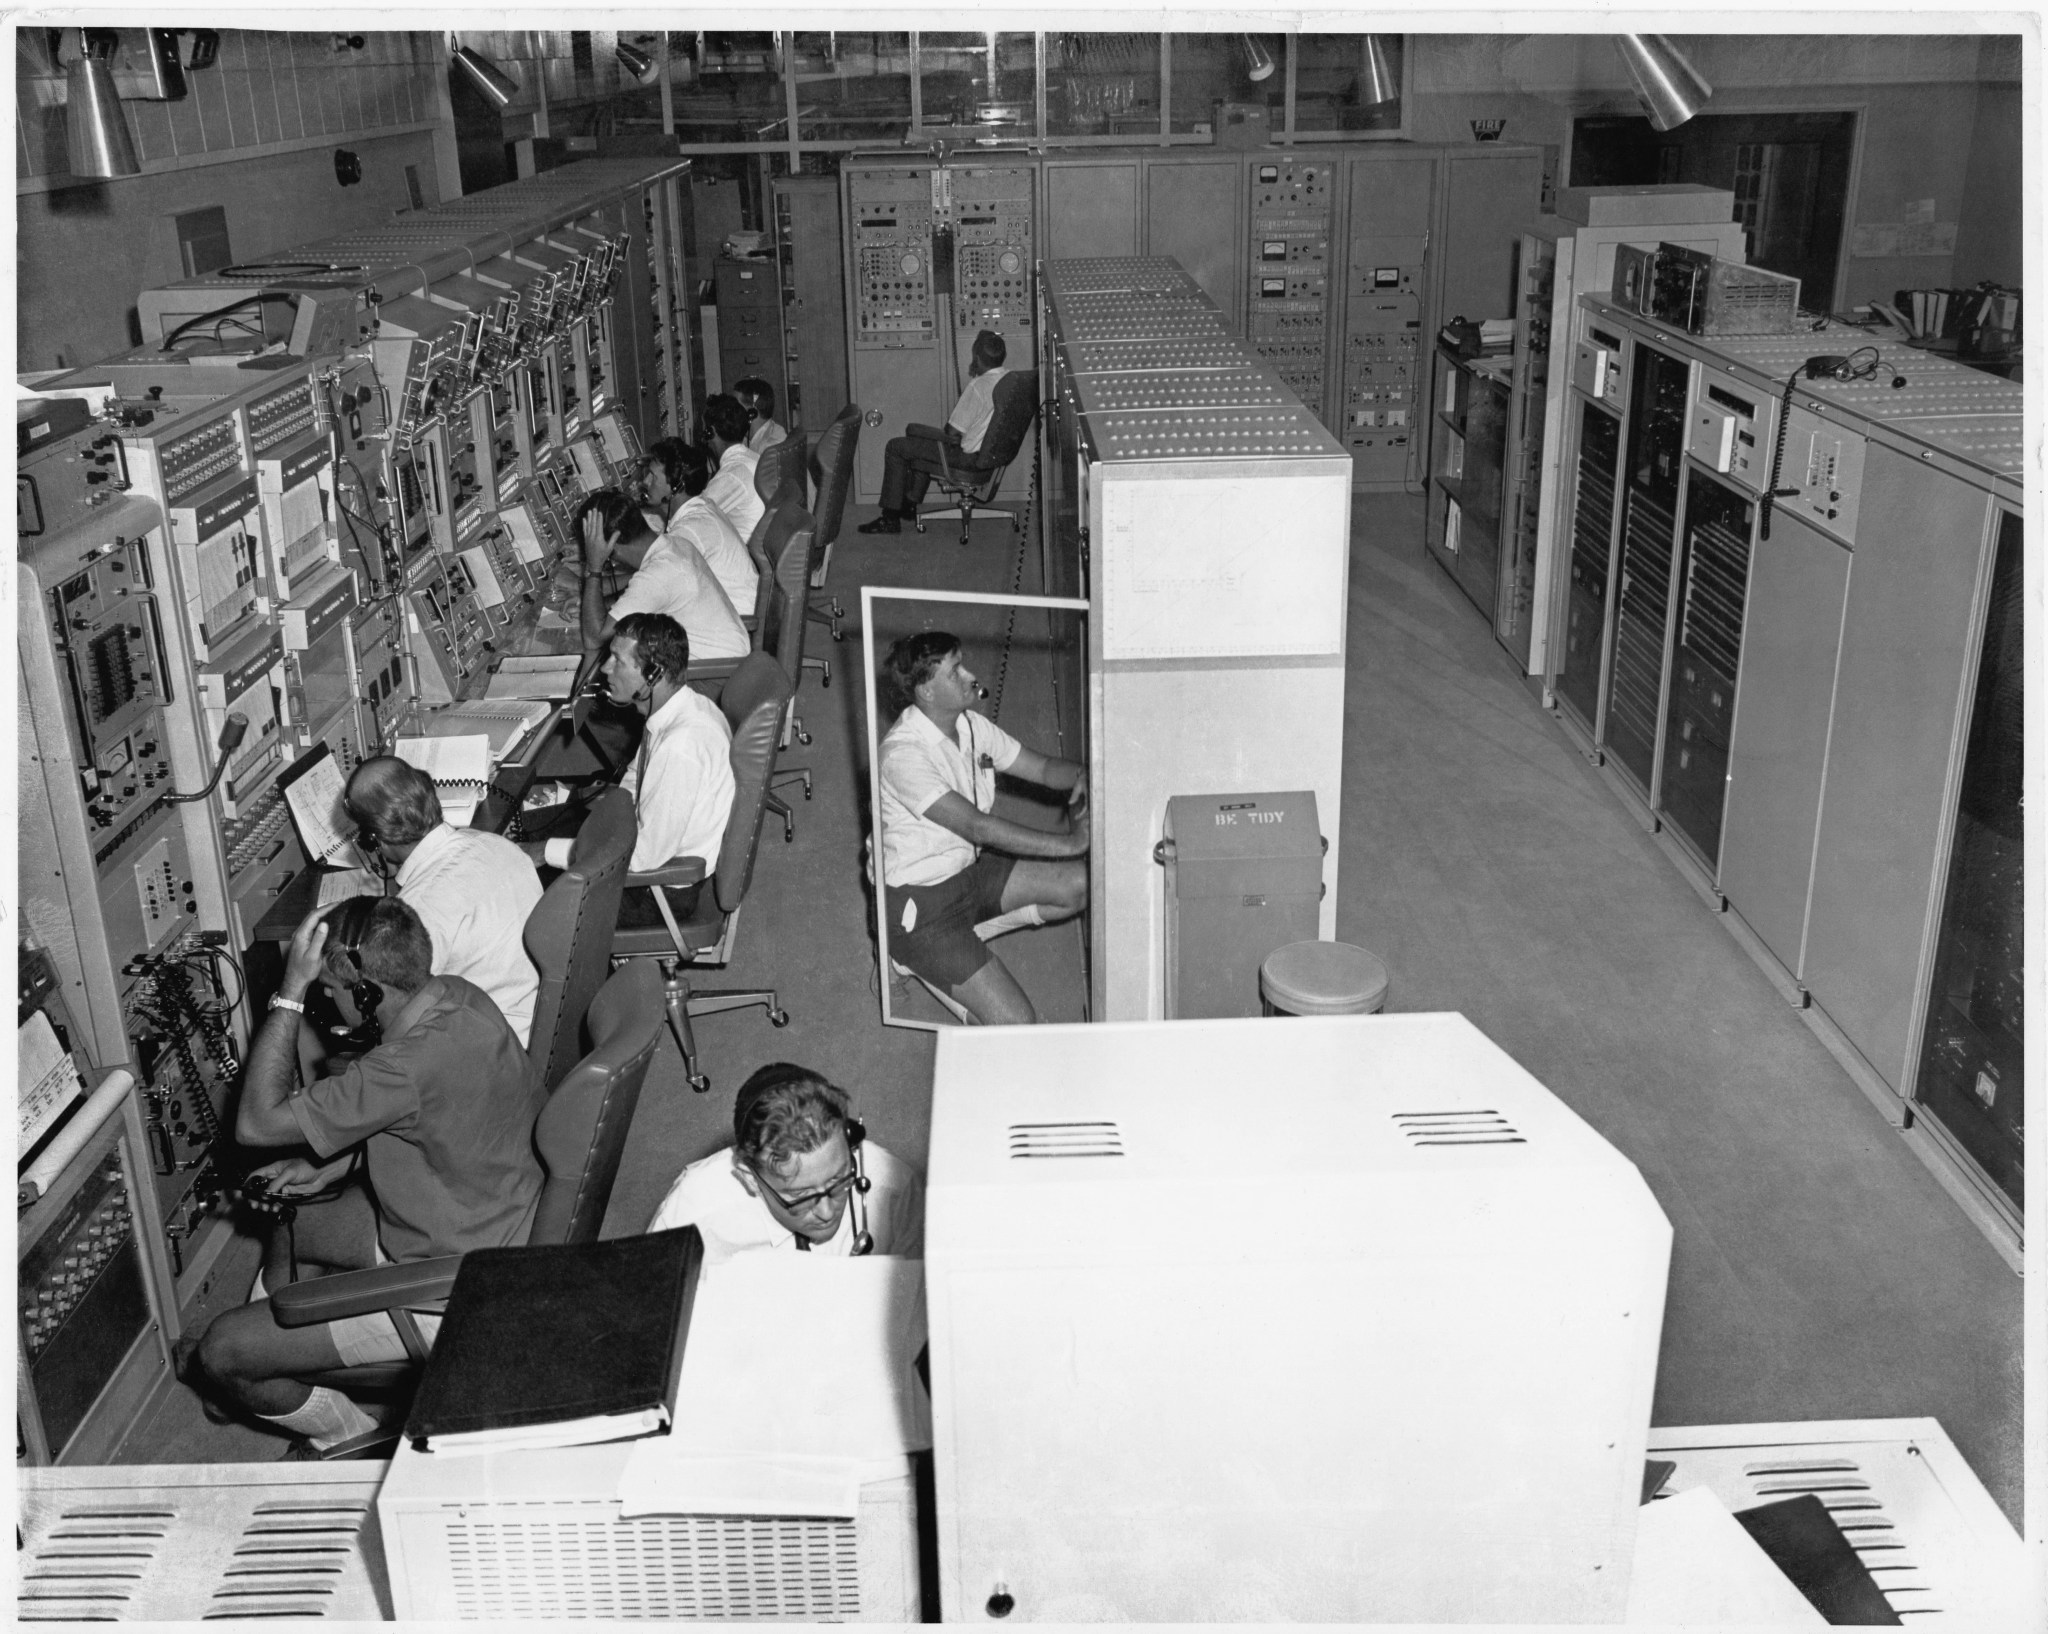 A black and white photo of Australian technicians operating and monitoring systems for the 26-meter (85-foot) antenna at the Tidbinbilla Deep Space Instrumentation Facility (now known as the Canberra Deep Space Communications Complex) in January 1969.